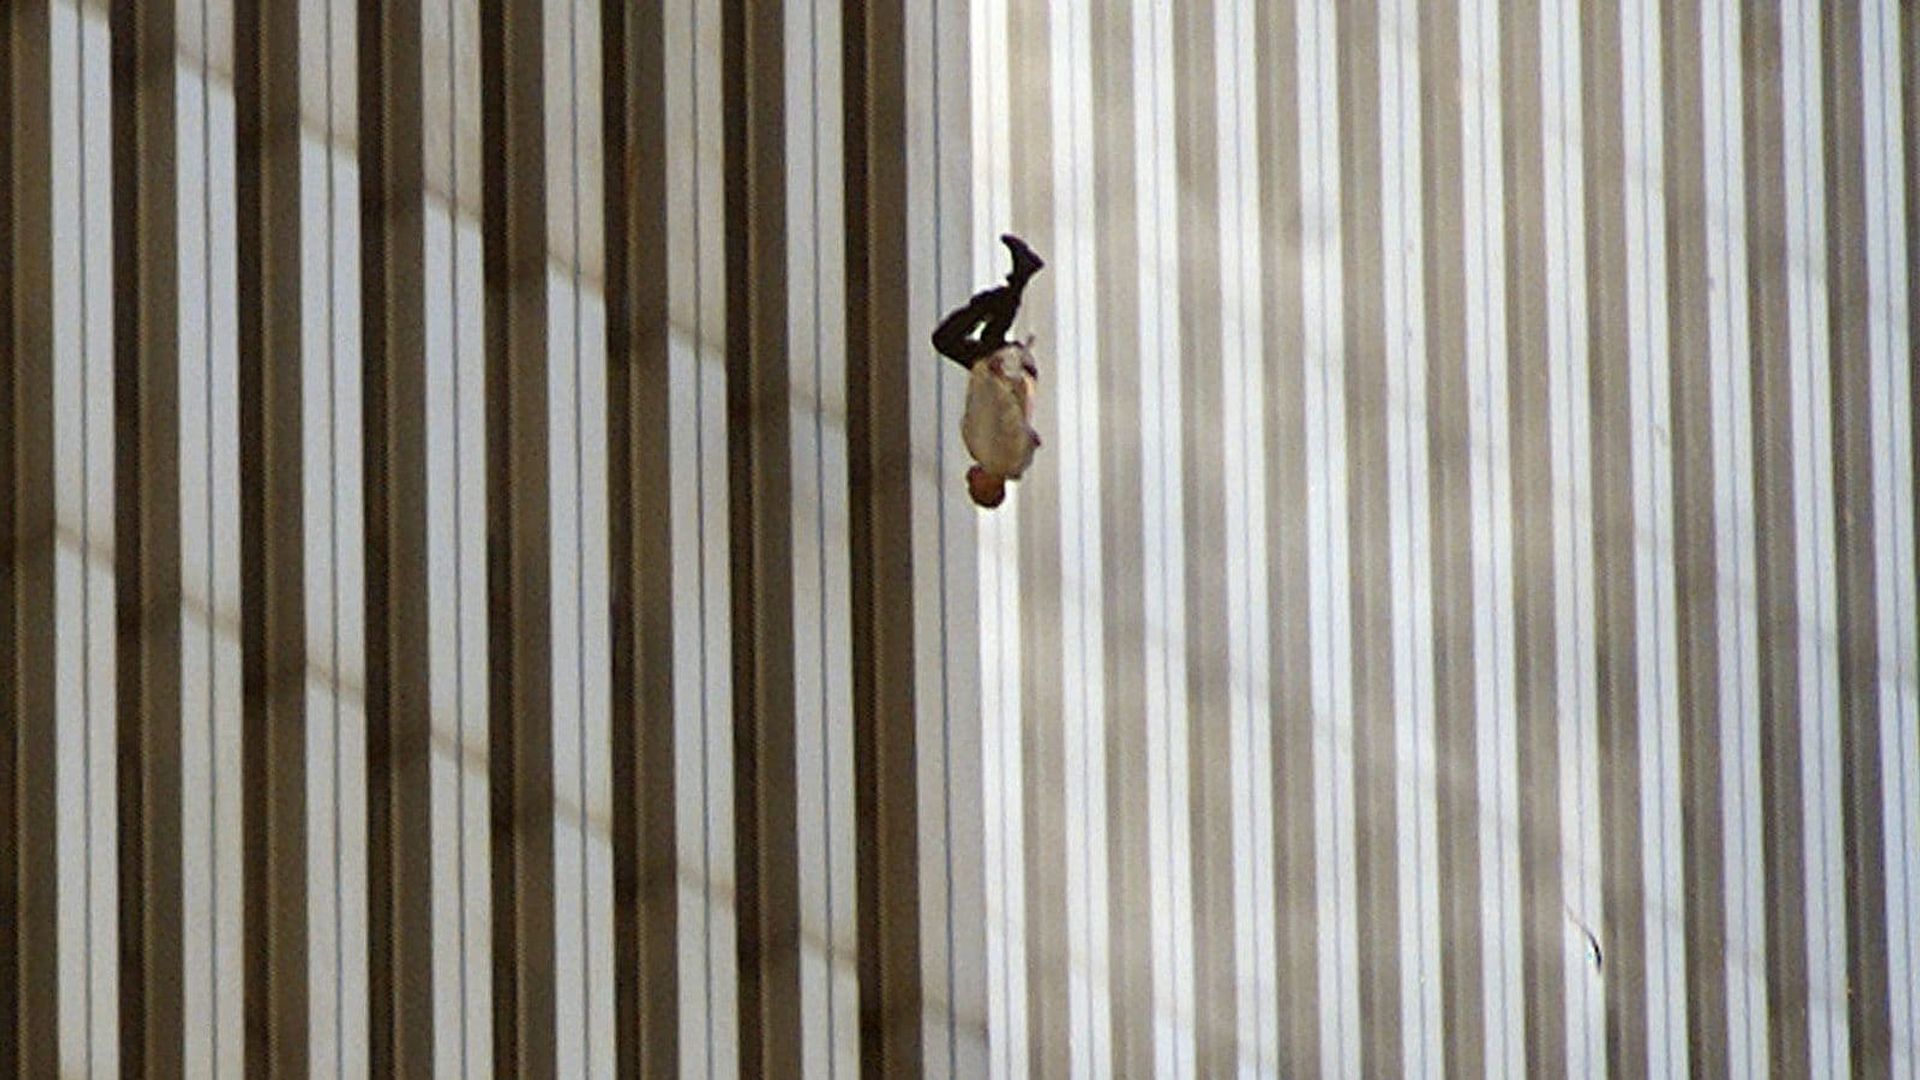 9/11: The Falling Man background